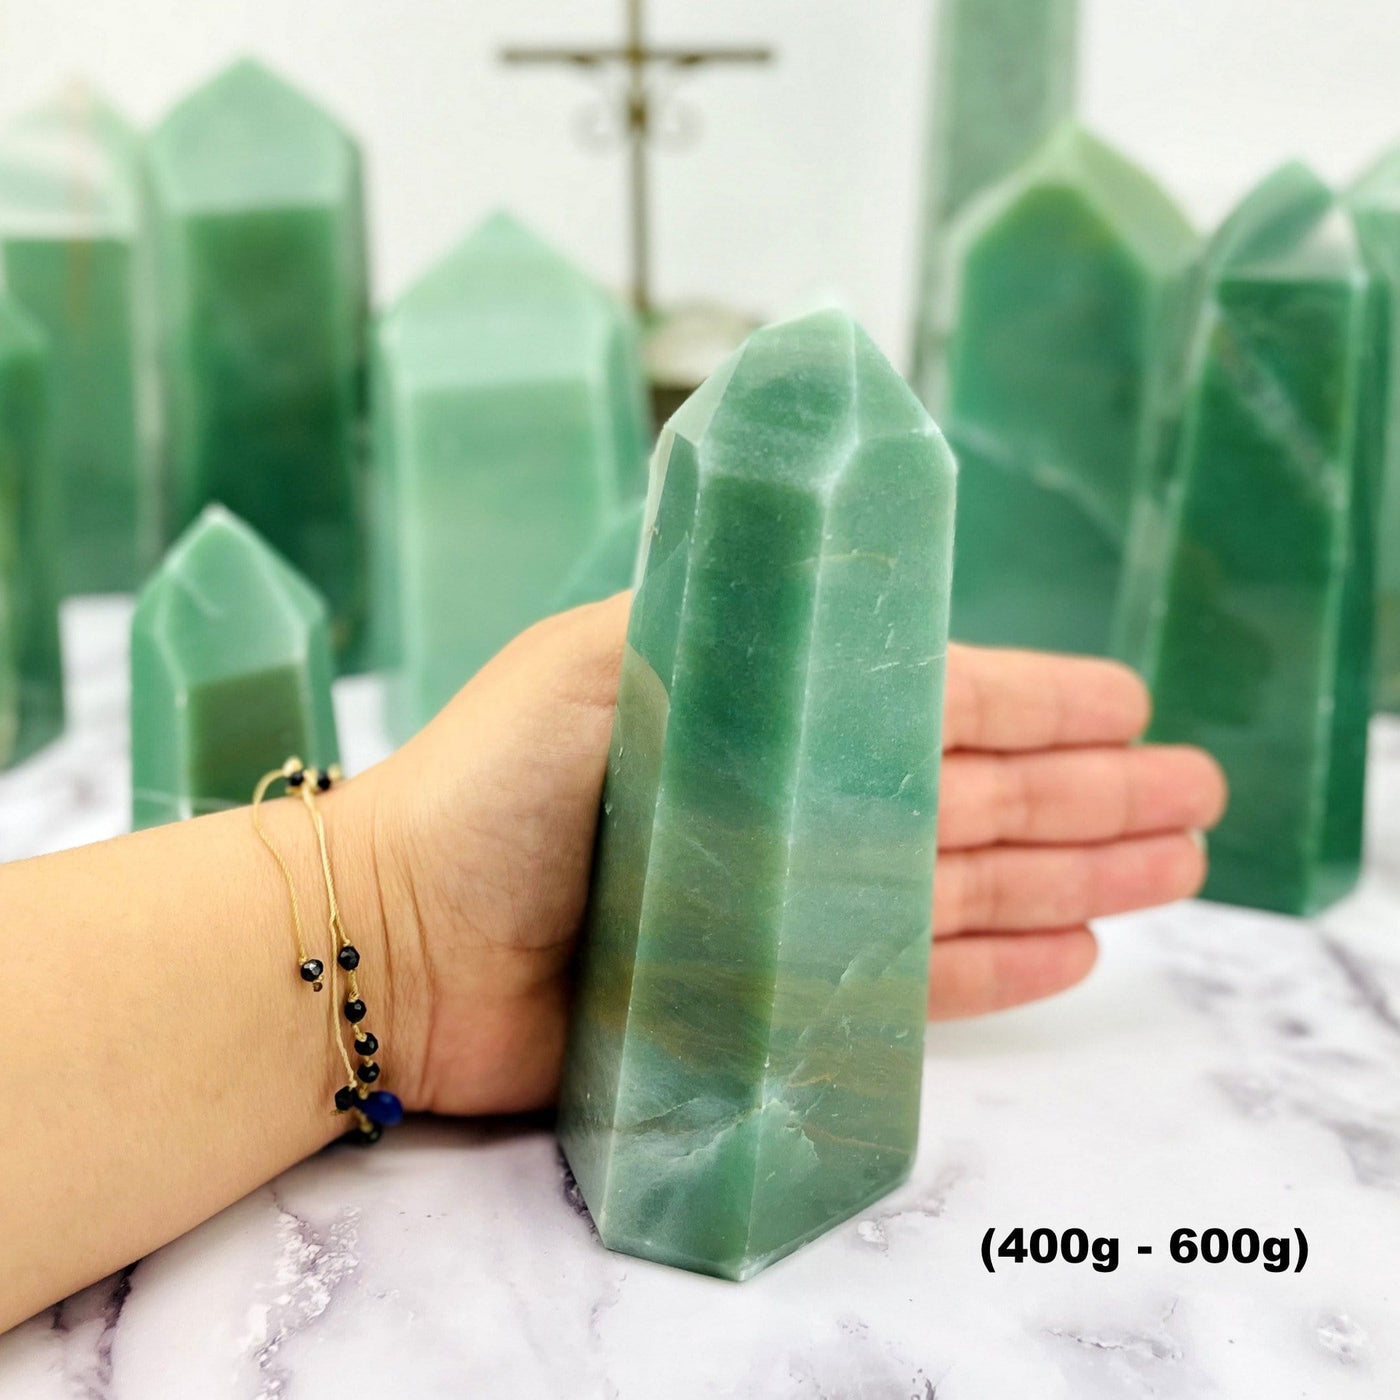 400-600g green quartz tower next to a woman's hand with other green quartz towers in the background.